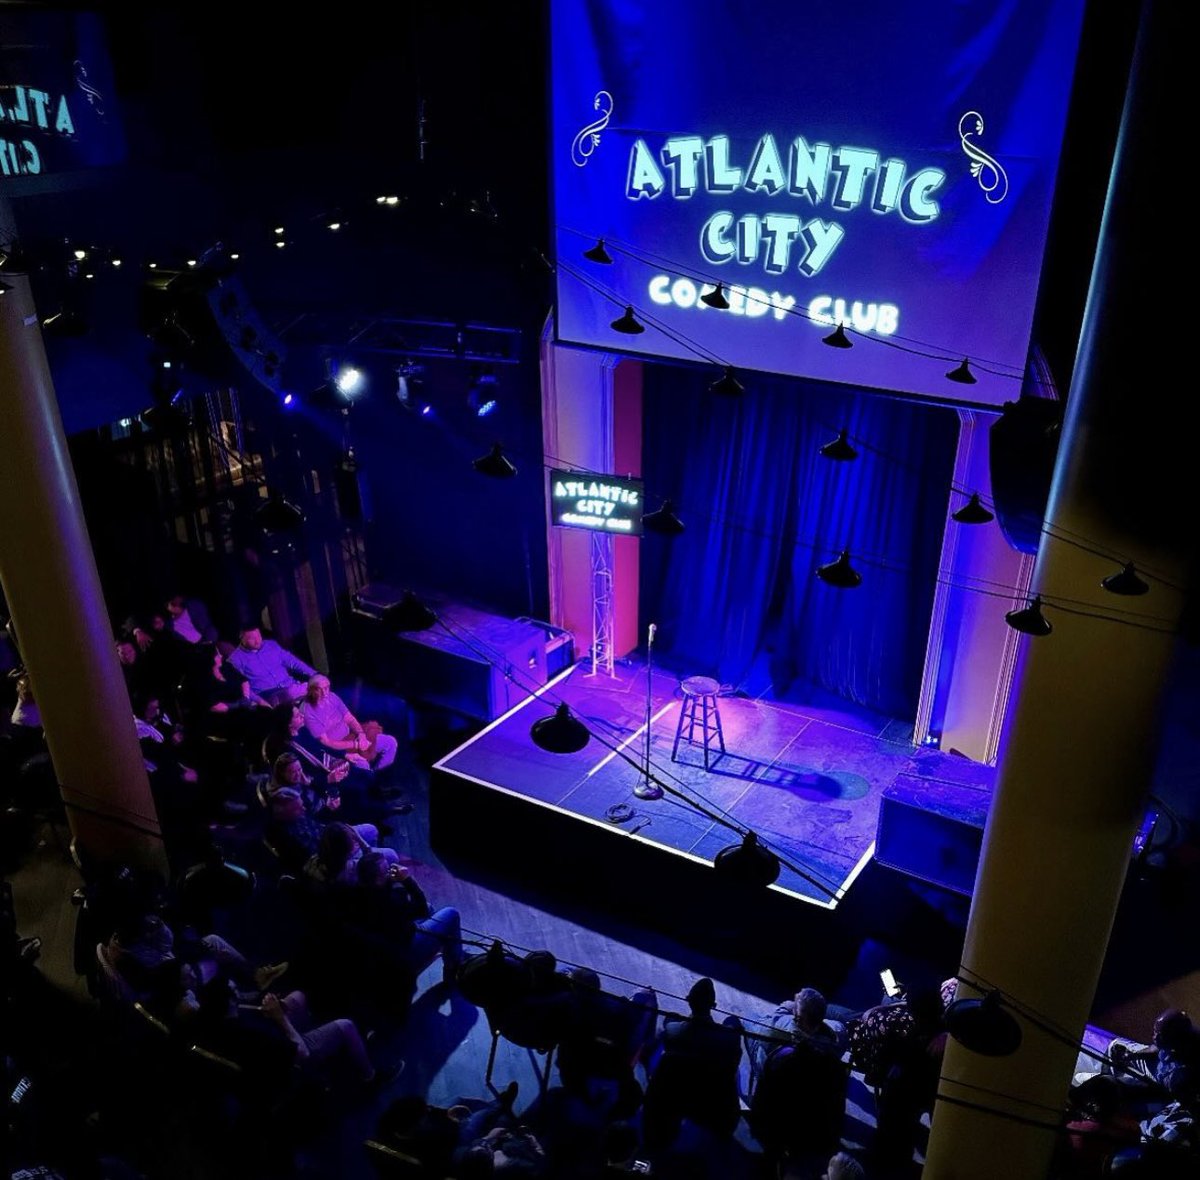 (1/2) Get ready for a night of comedy gold at the @ACComedyClub - now located at @TropicanaAC inside the Royce Social Hall! 🙌 See the best live comedy show in town. The showroom is headlined by the funniest comedians from New Jersey, Philadelphia, and New York right here in